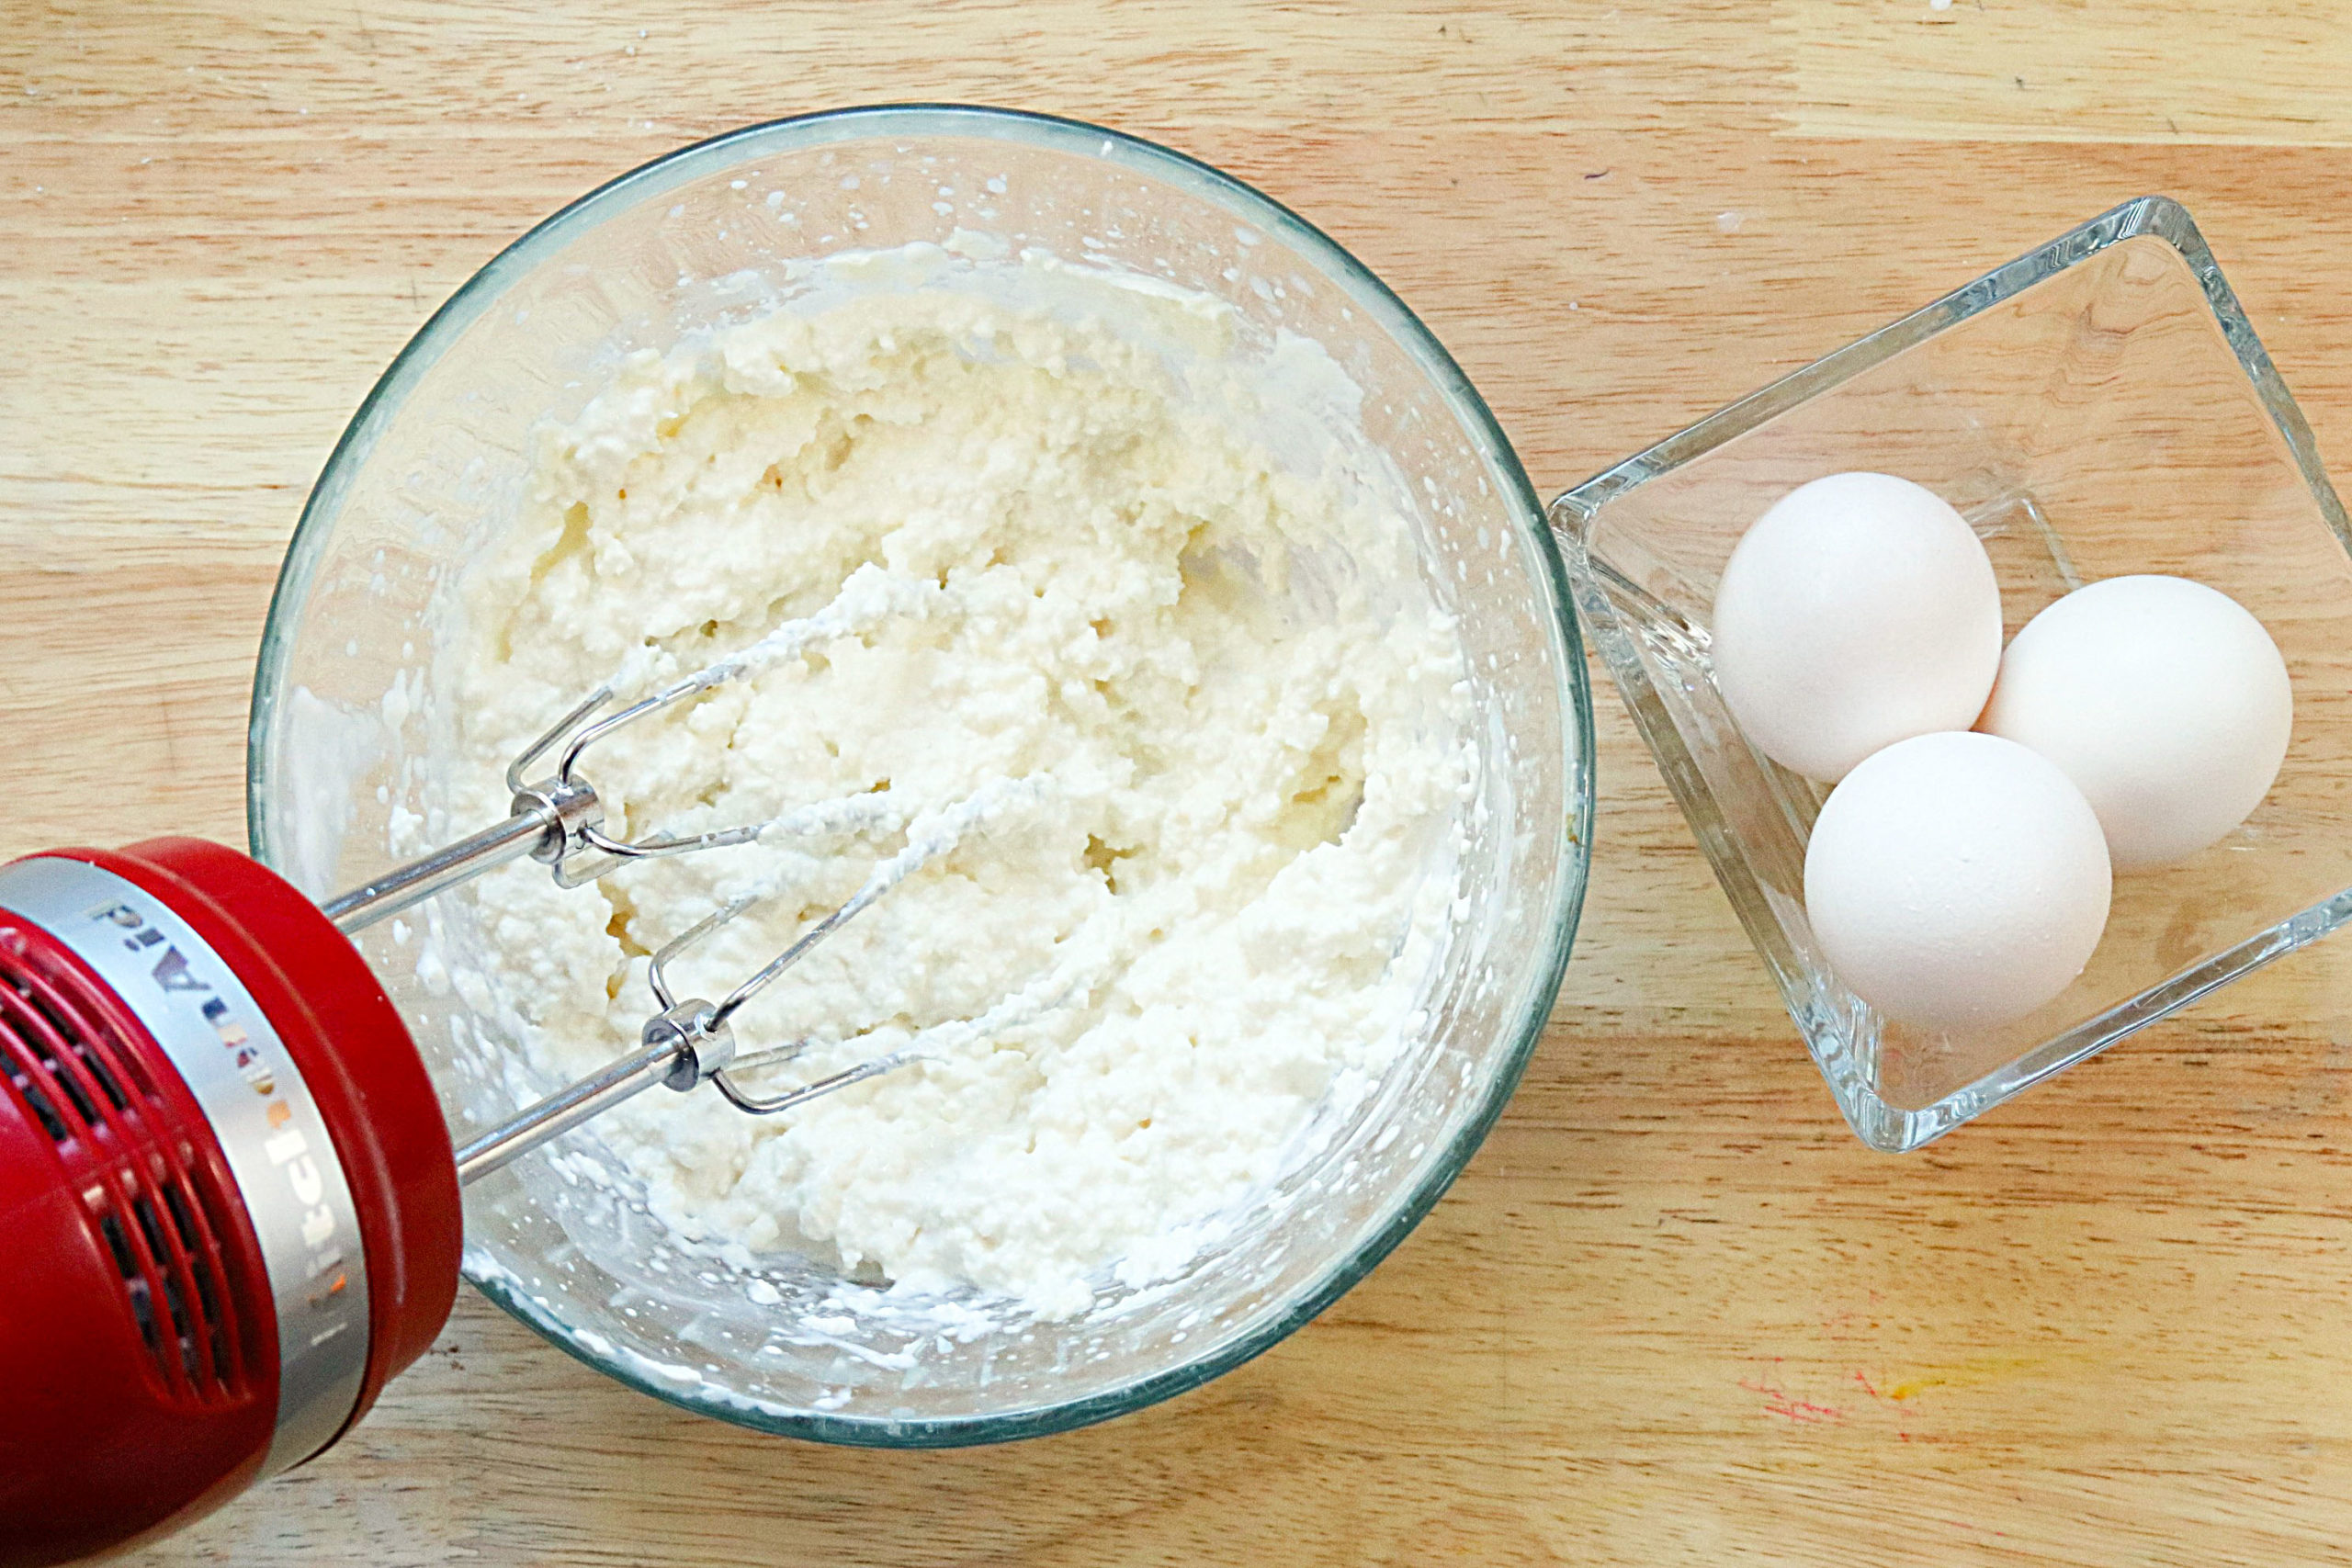 A red handmixer mixes the cake batter. There are three eggs in a glass bowl next to the batter on the right.